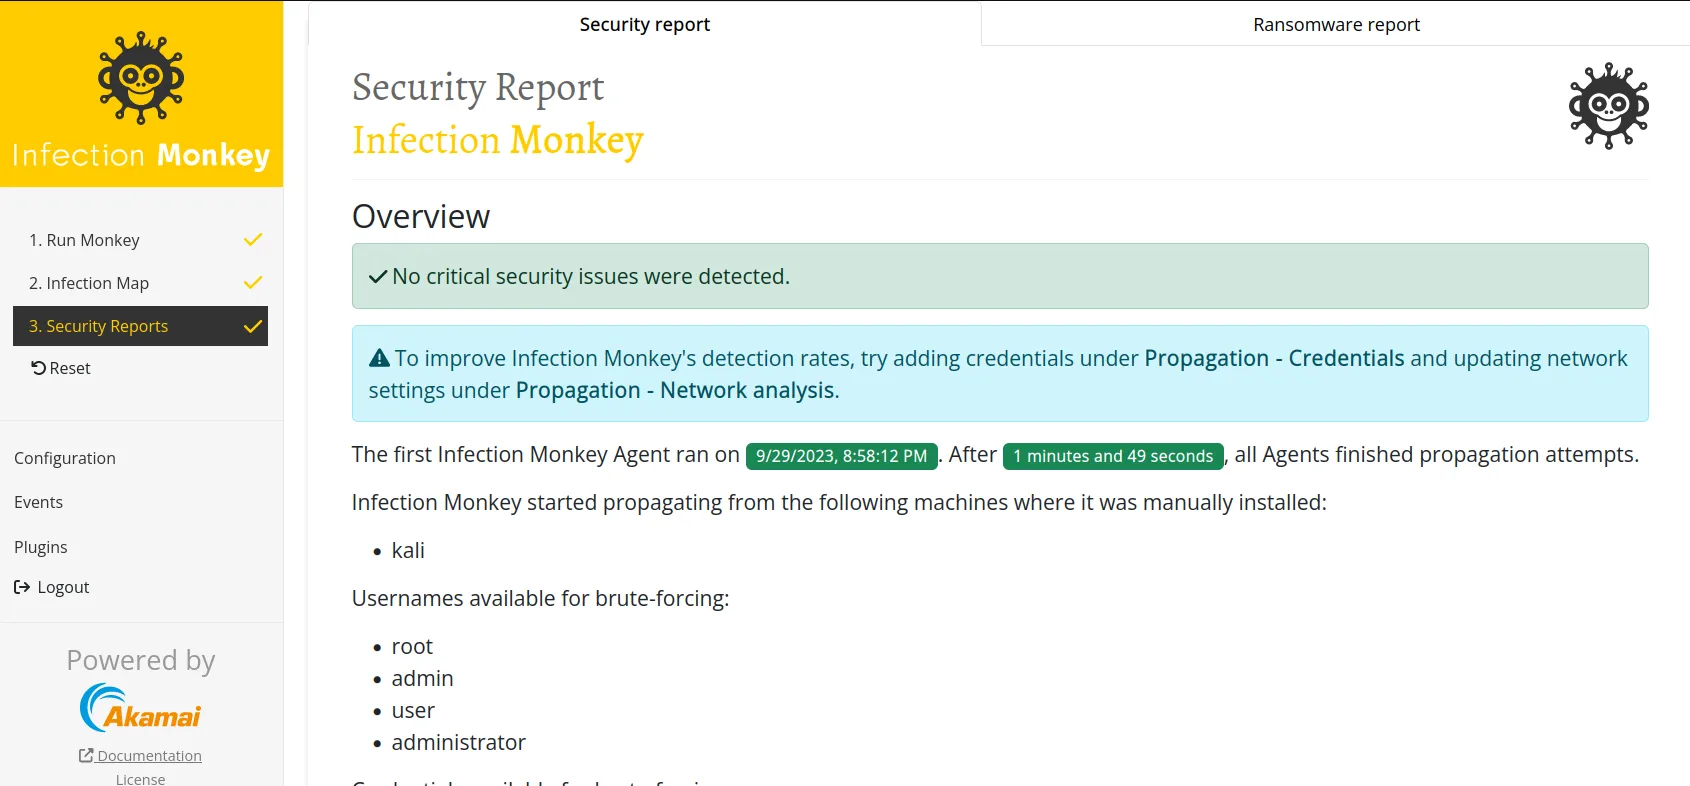 View the Security Reports